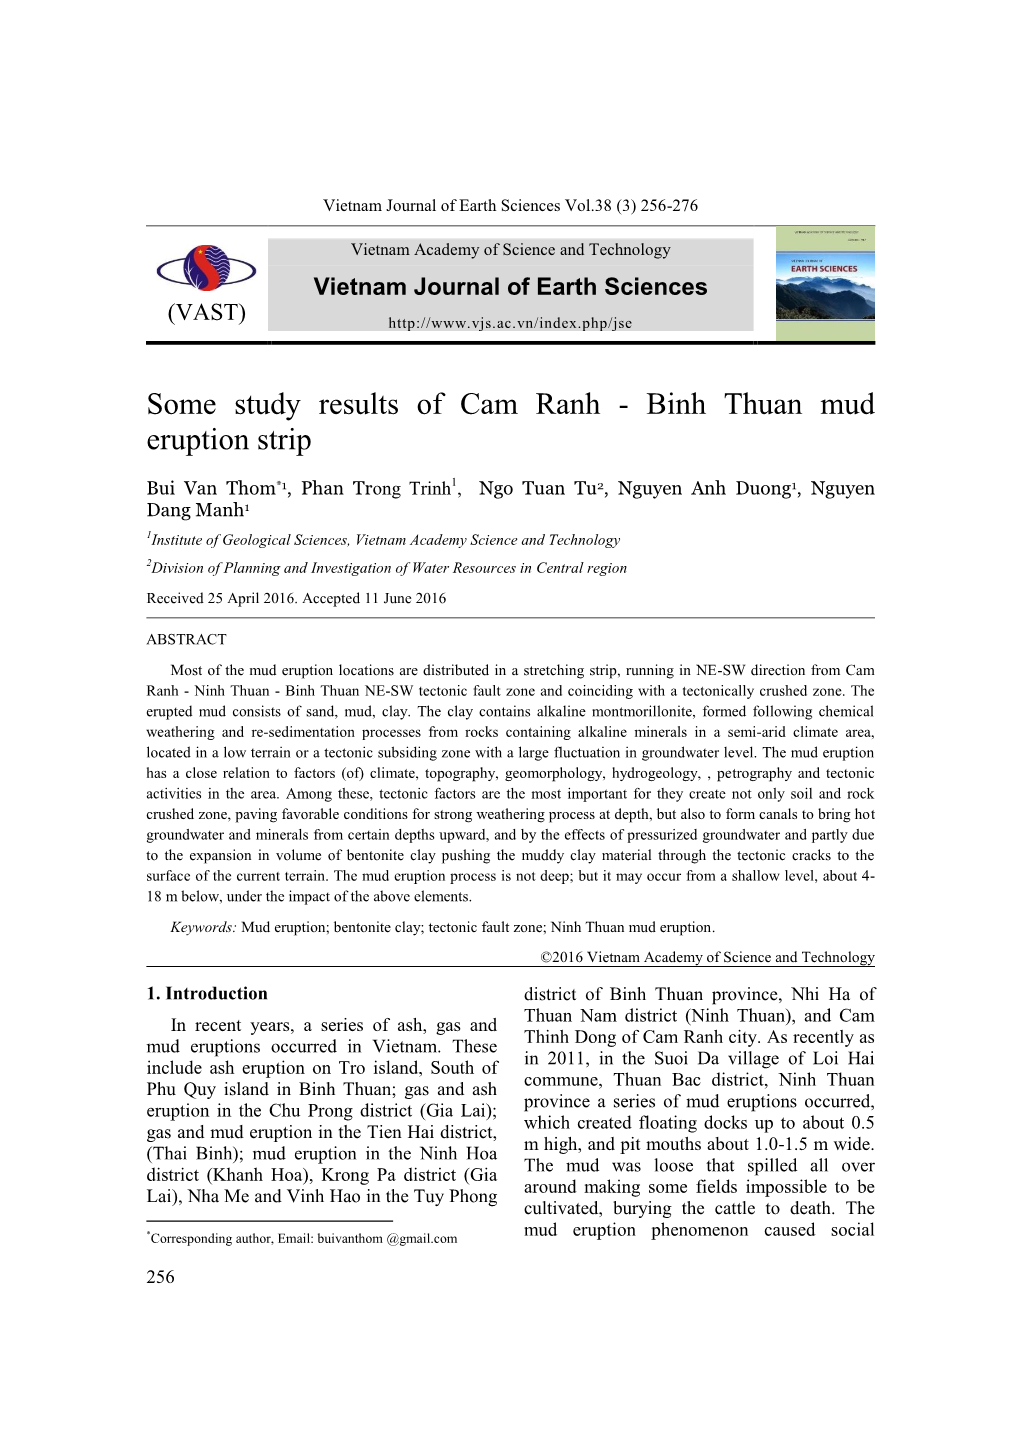 Some Study Results of Cam Ranh - Binh Thuan Mud Eruption Strip